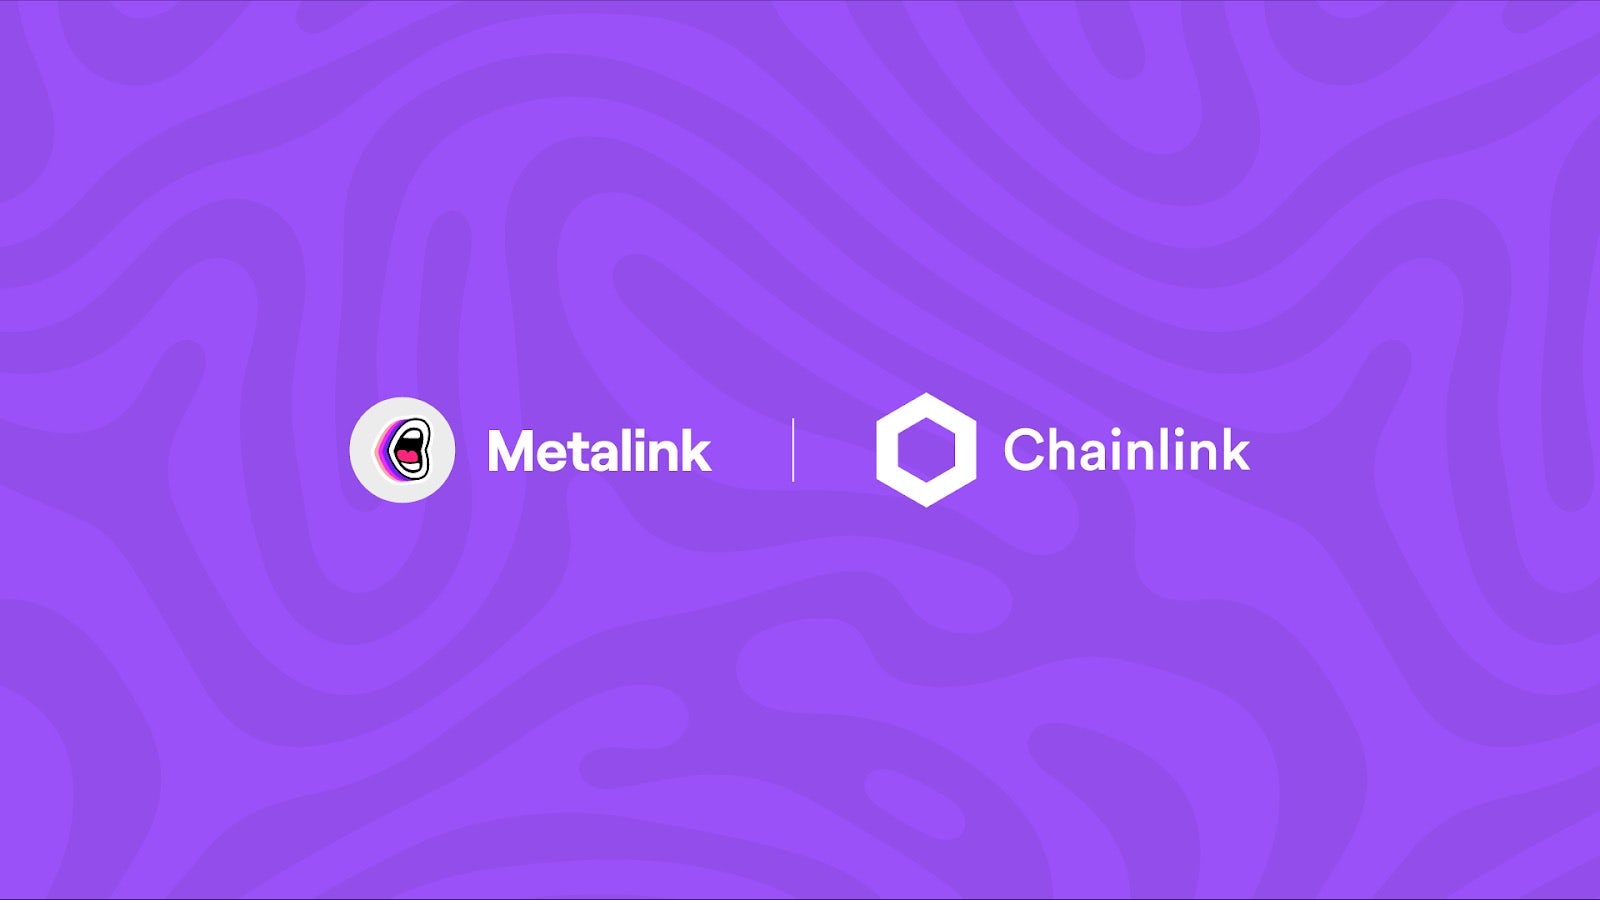 Metalink has incorporated Chainlink VRF to ensure fairness of giveaways.